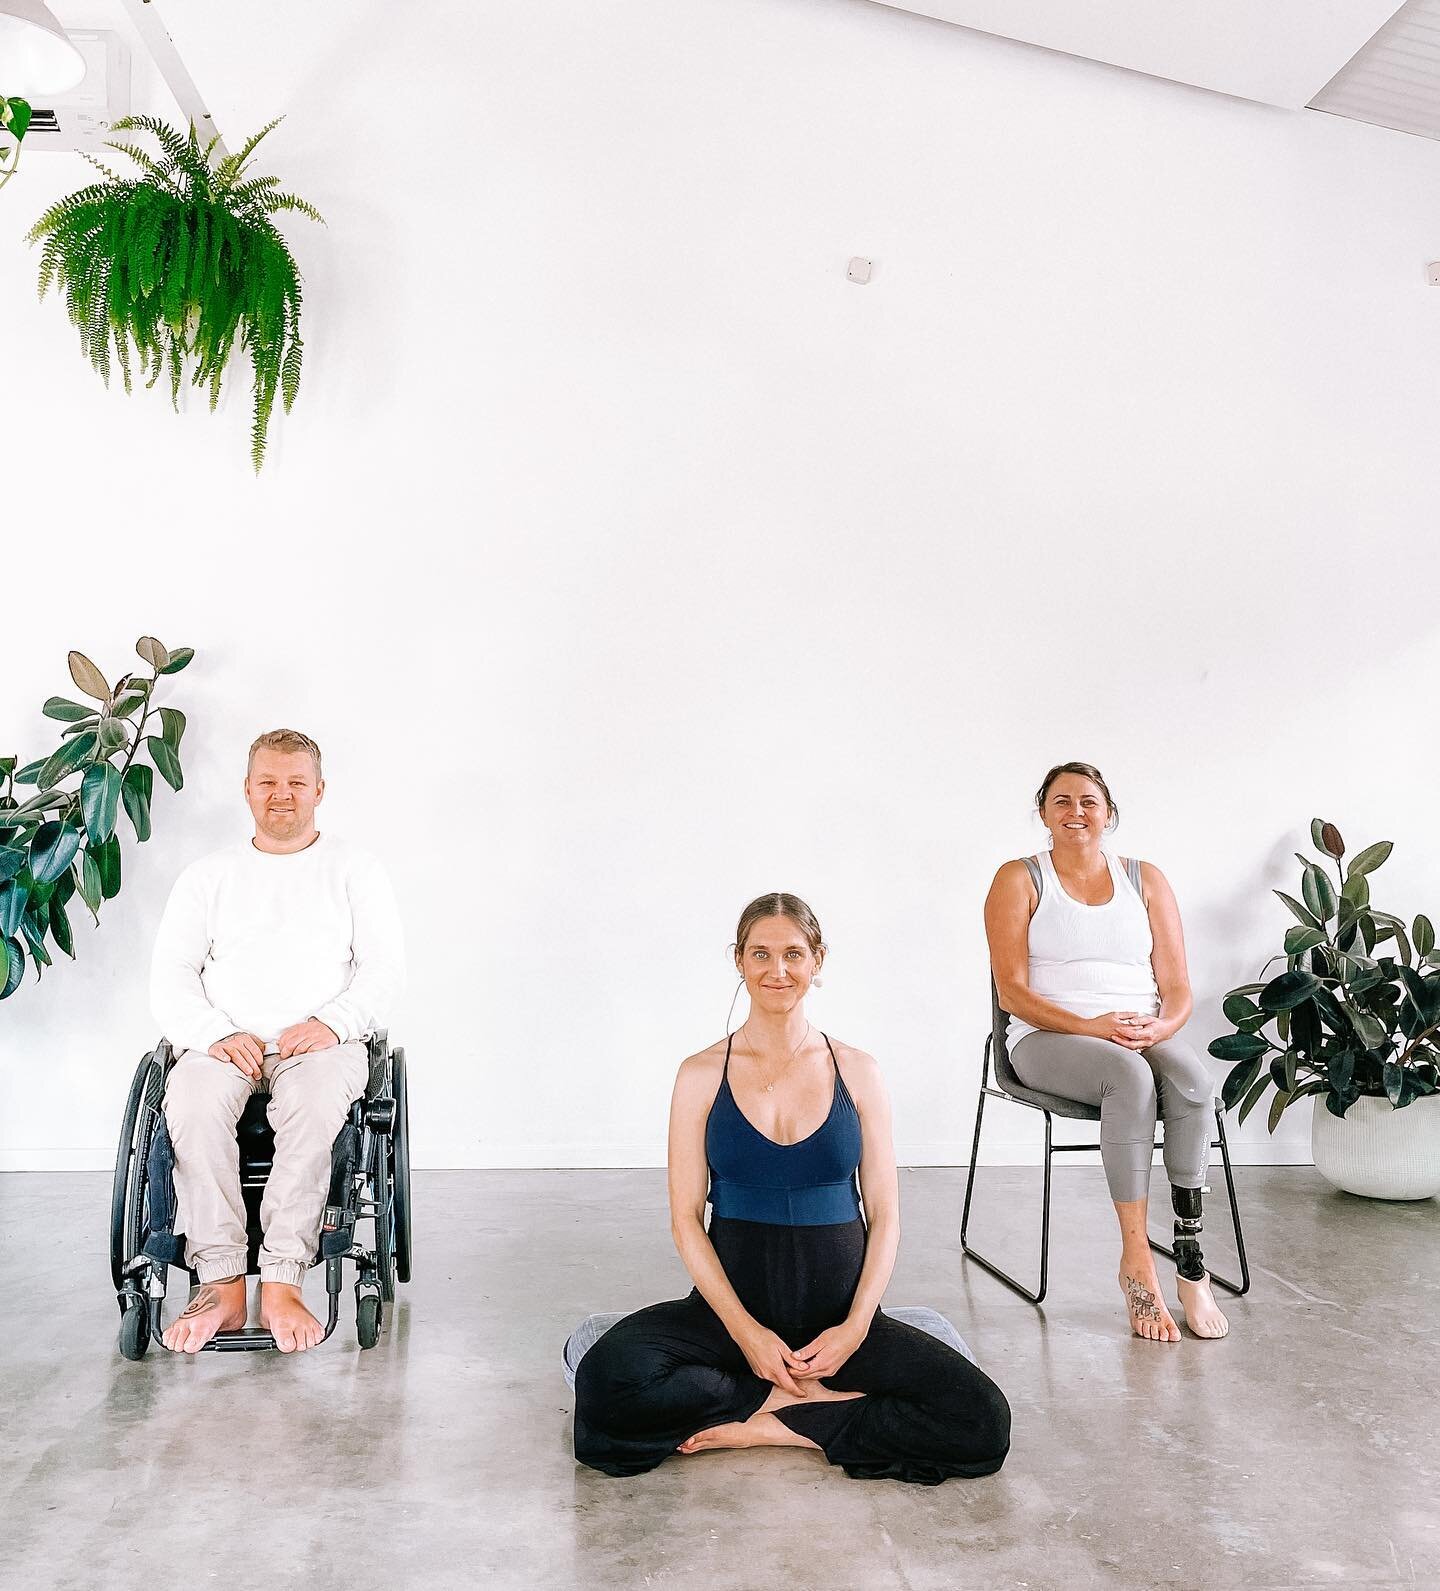 Oh yes&mdash;this happened! 🌻

We filmed a yoga series for all abilities ✨. It began as a series for anyone living with Spinal Cord Injury (SCI) but along the way we realised these classes might just spark some intrigue and inspiration into breath-i